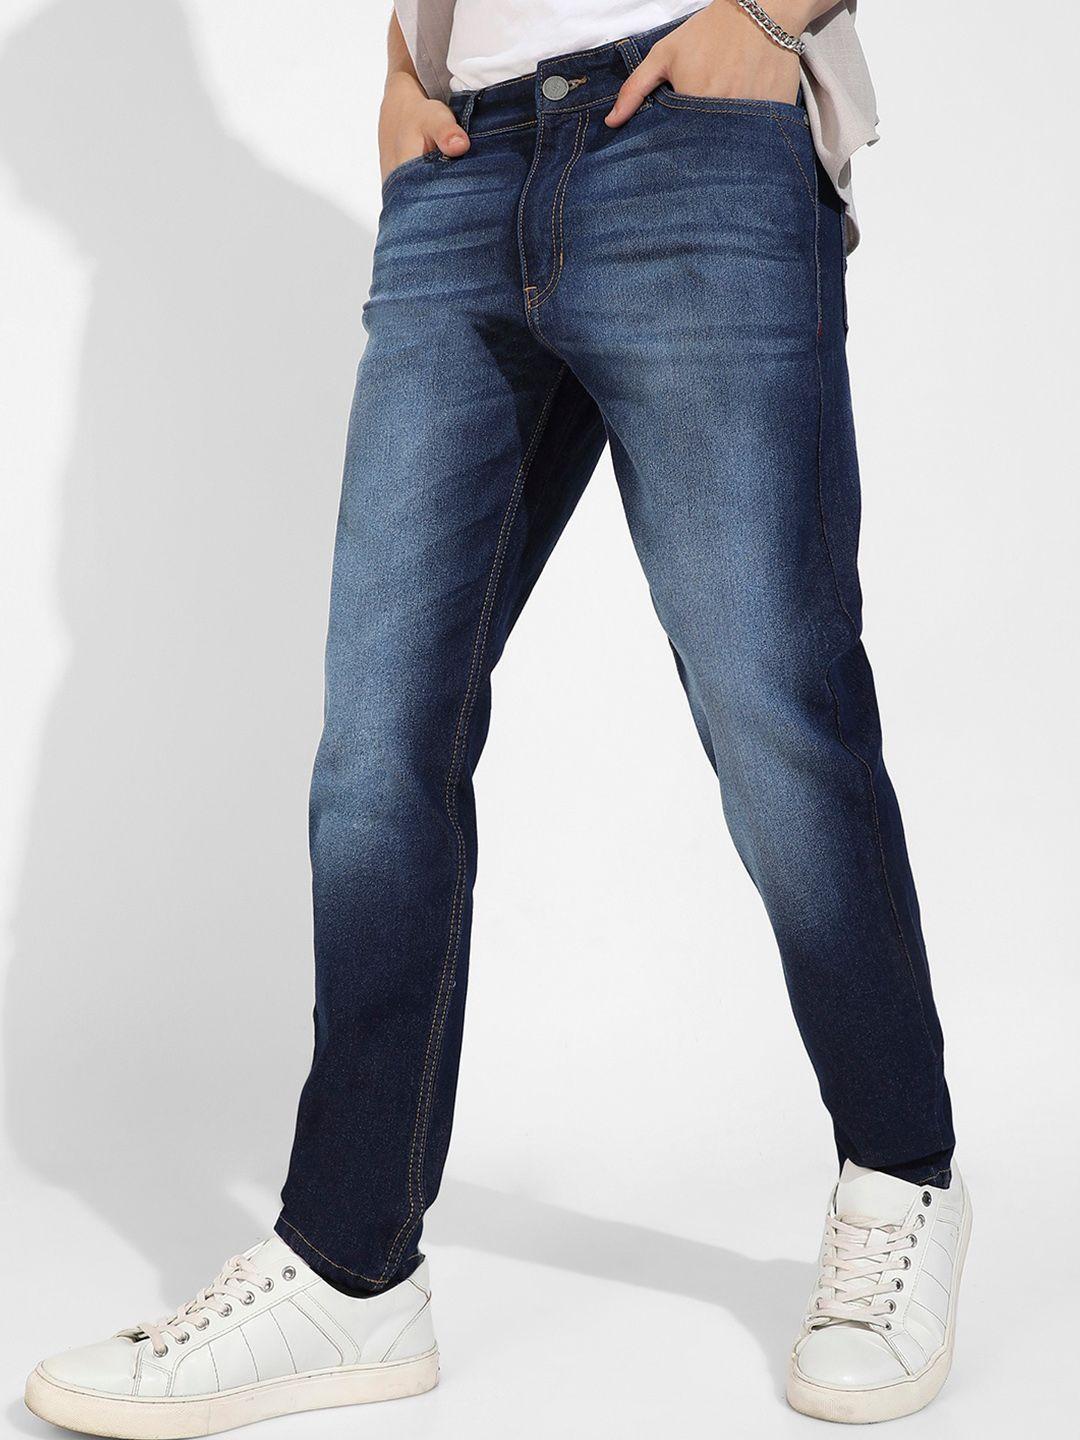 campus-sutra-men-navy-blue-smart-slim-fit-heavy-fade-stretchable-jeans